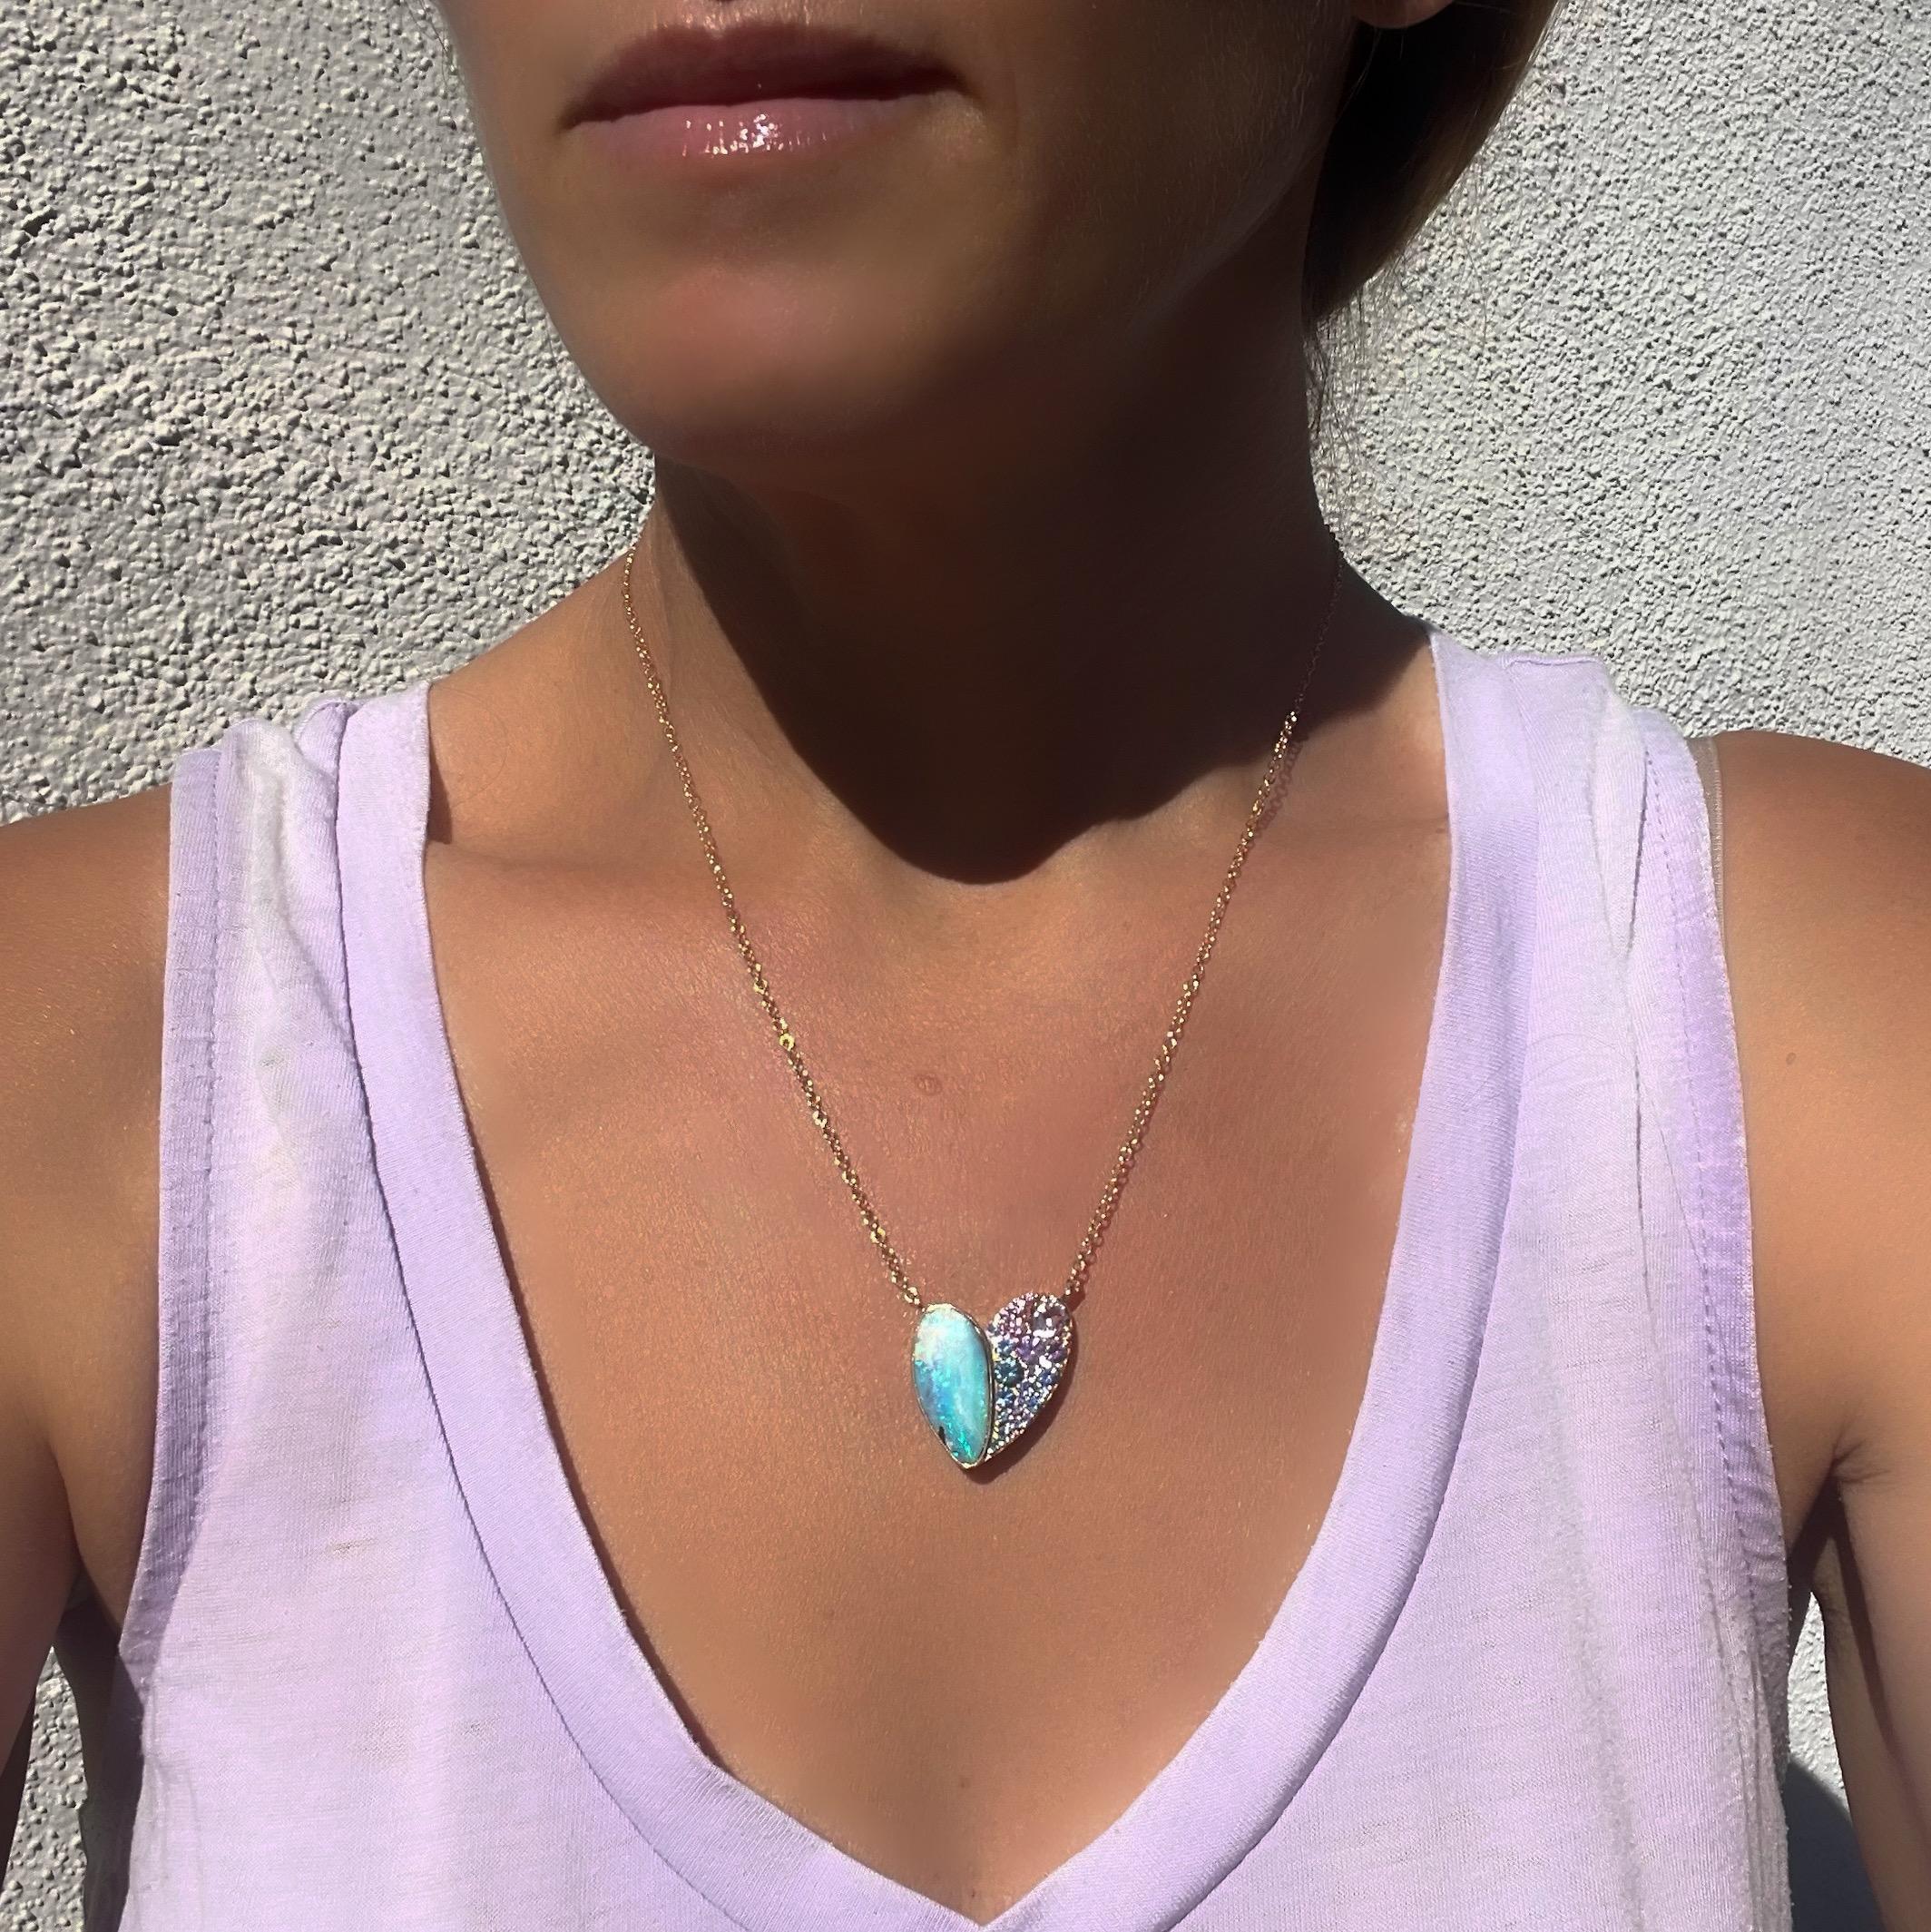 NIXIN Jewelry Cobbled Heart Opal Necklace with Sapphires in 14k Rose Gold 6